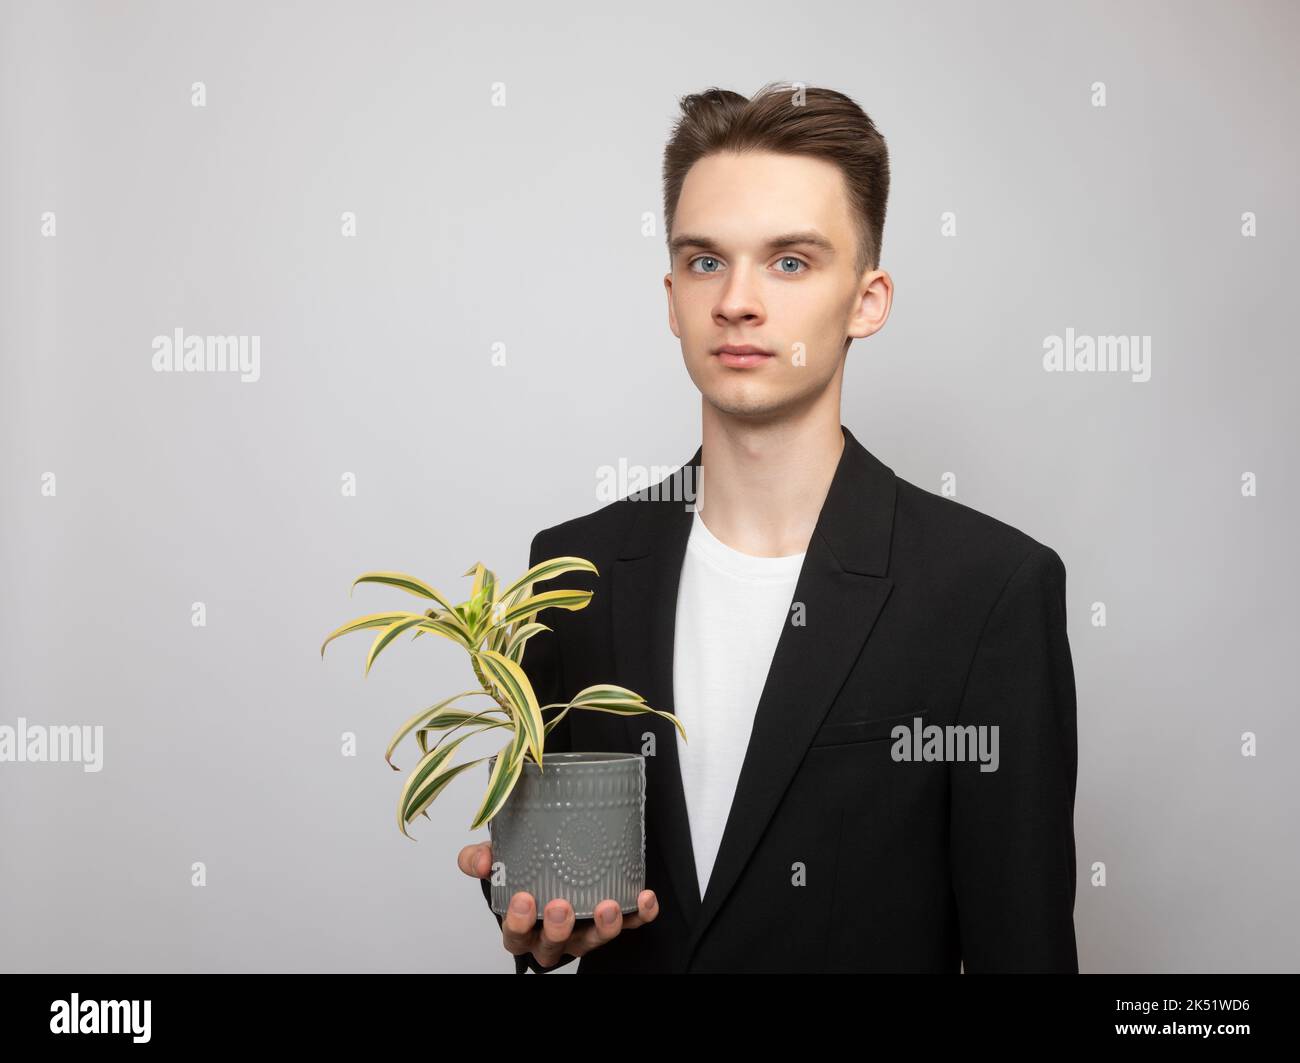 Portrait of elegant young man wearing black  suit holding potted house plant looking at camera. Studio shot on gray background Stock Photo